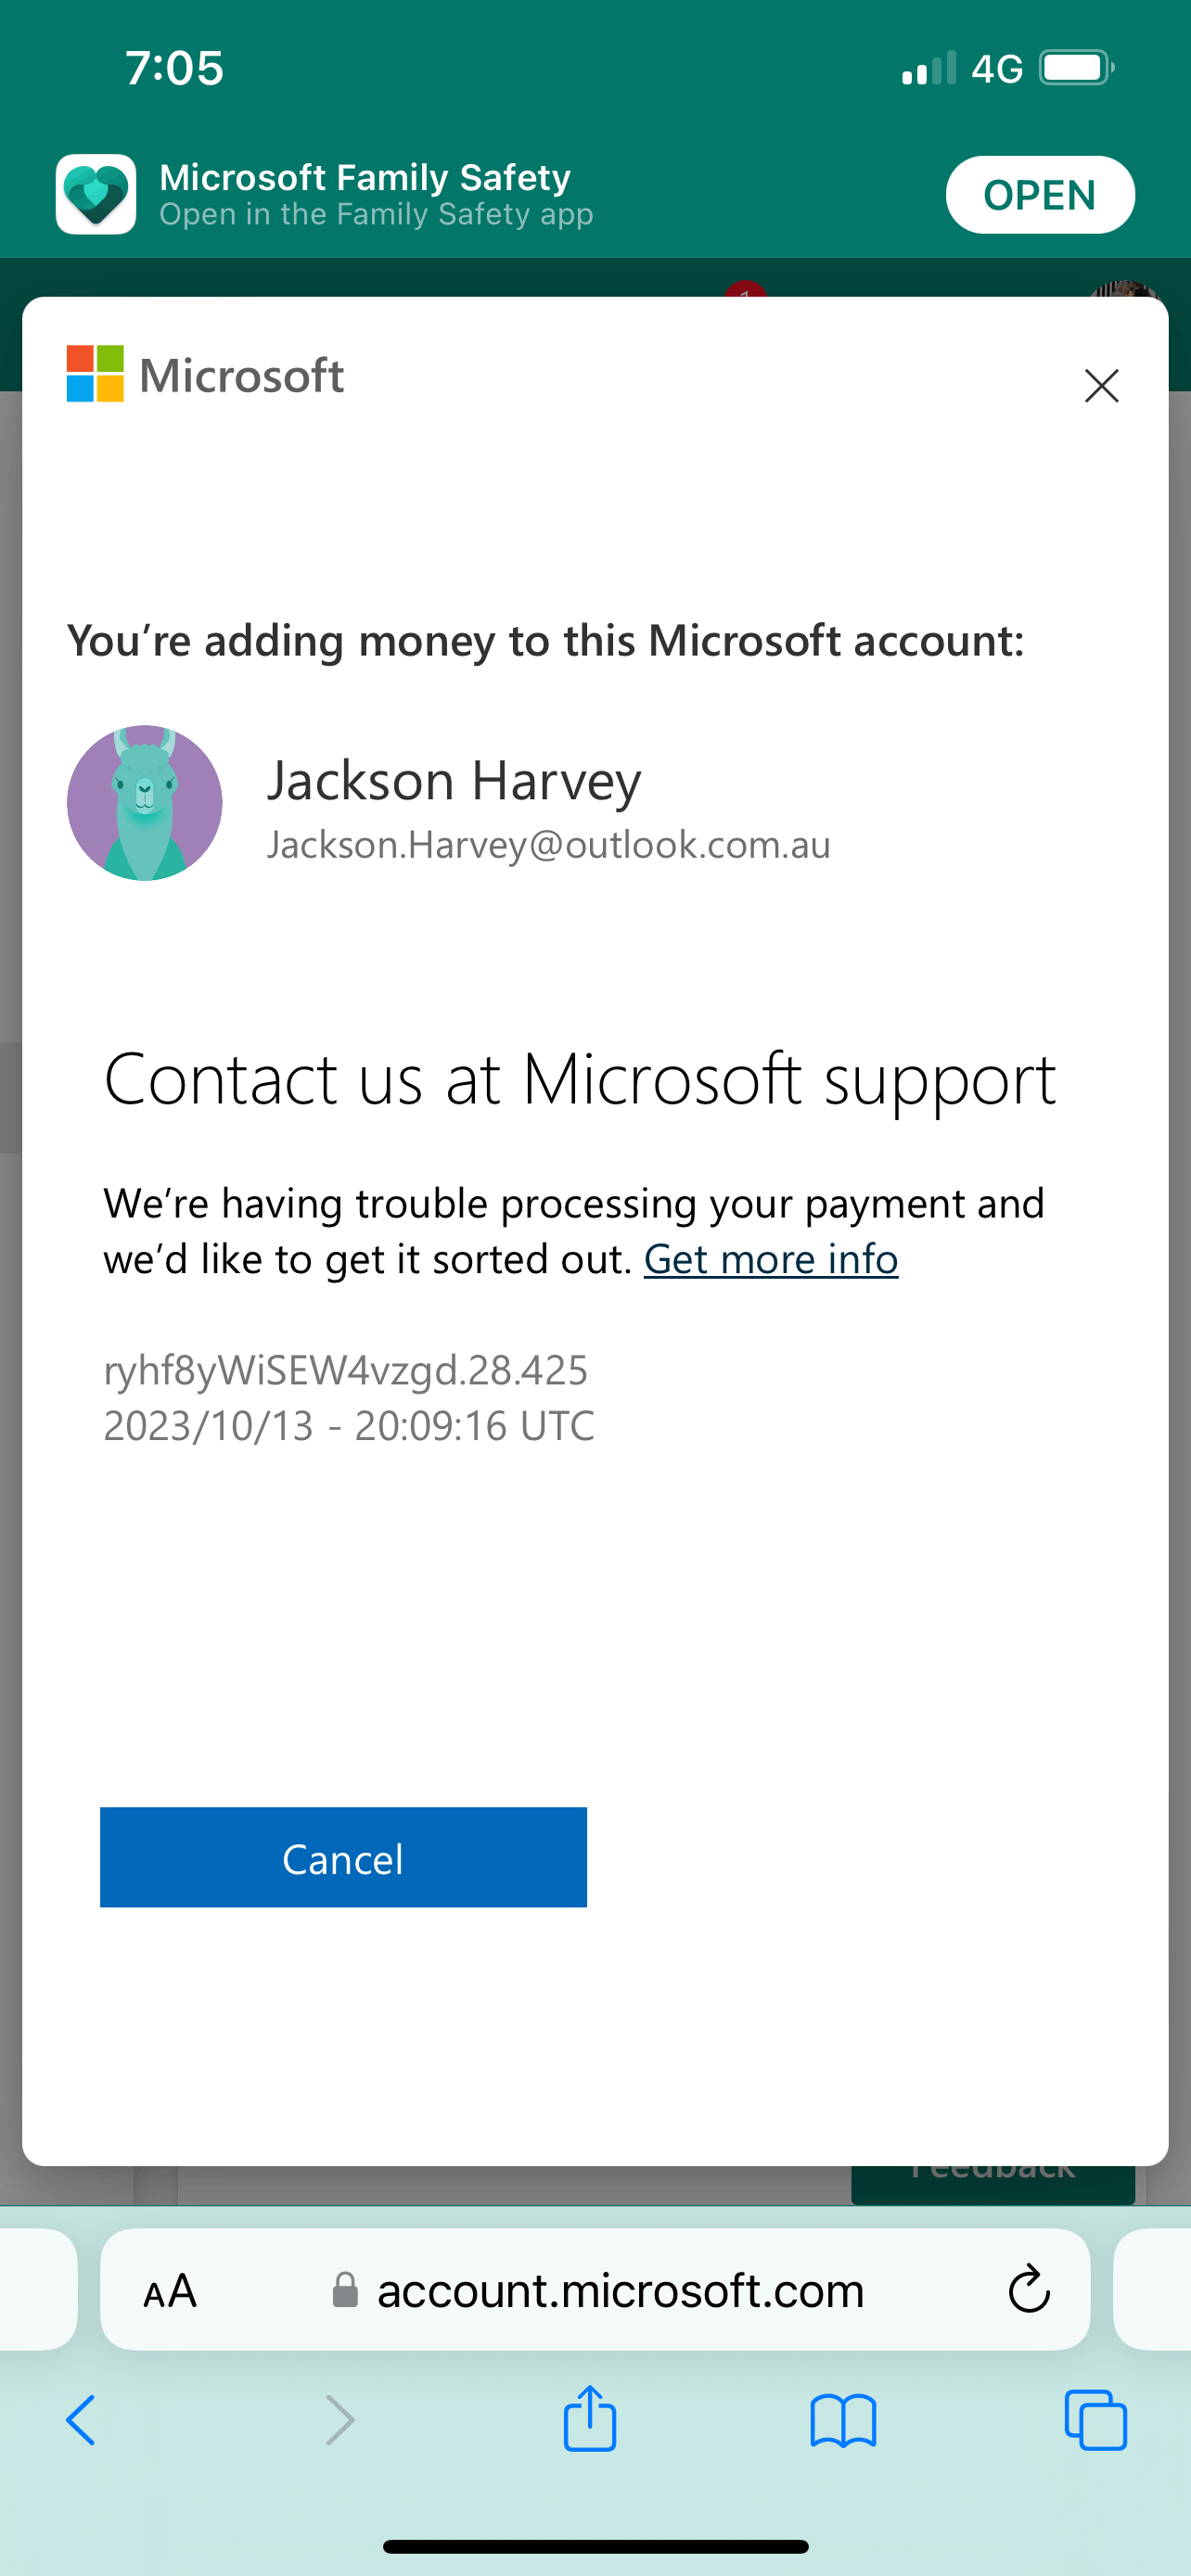 Contact us at Microsoft support (Xbox Payment Error) - Microsoft